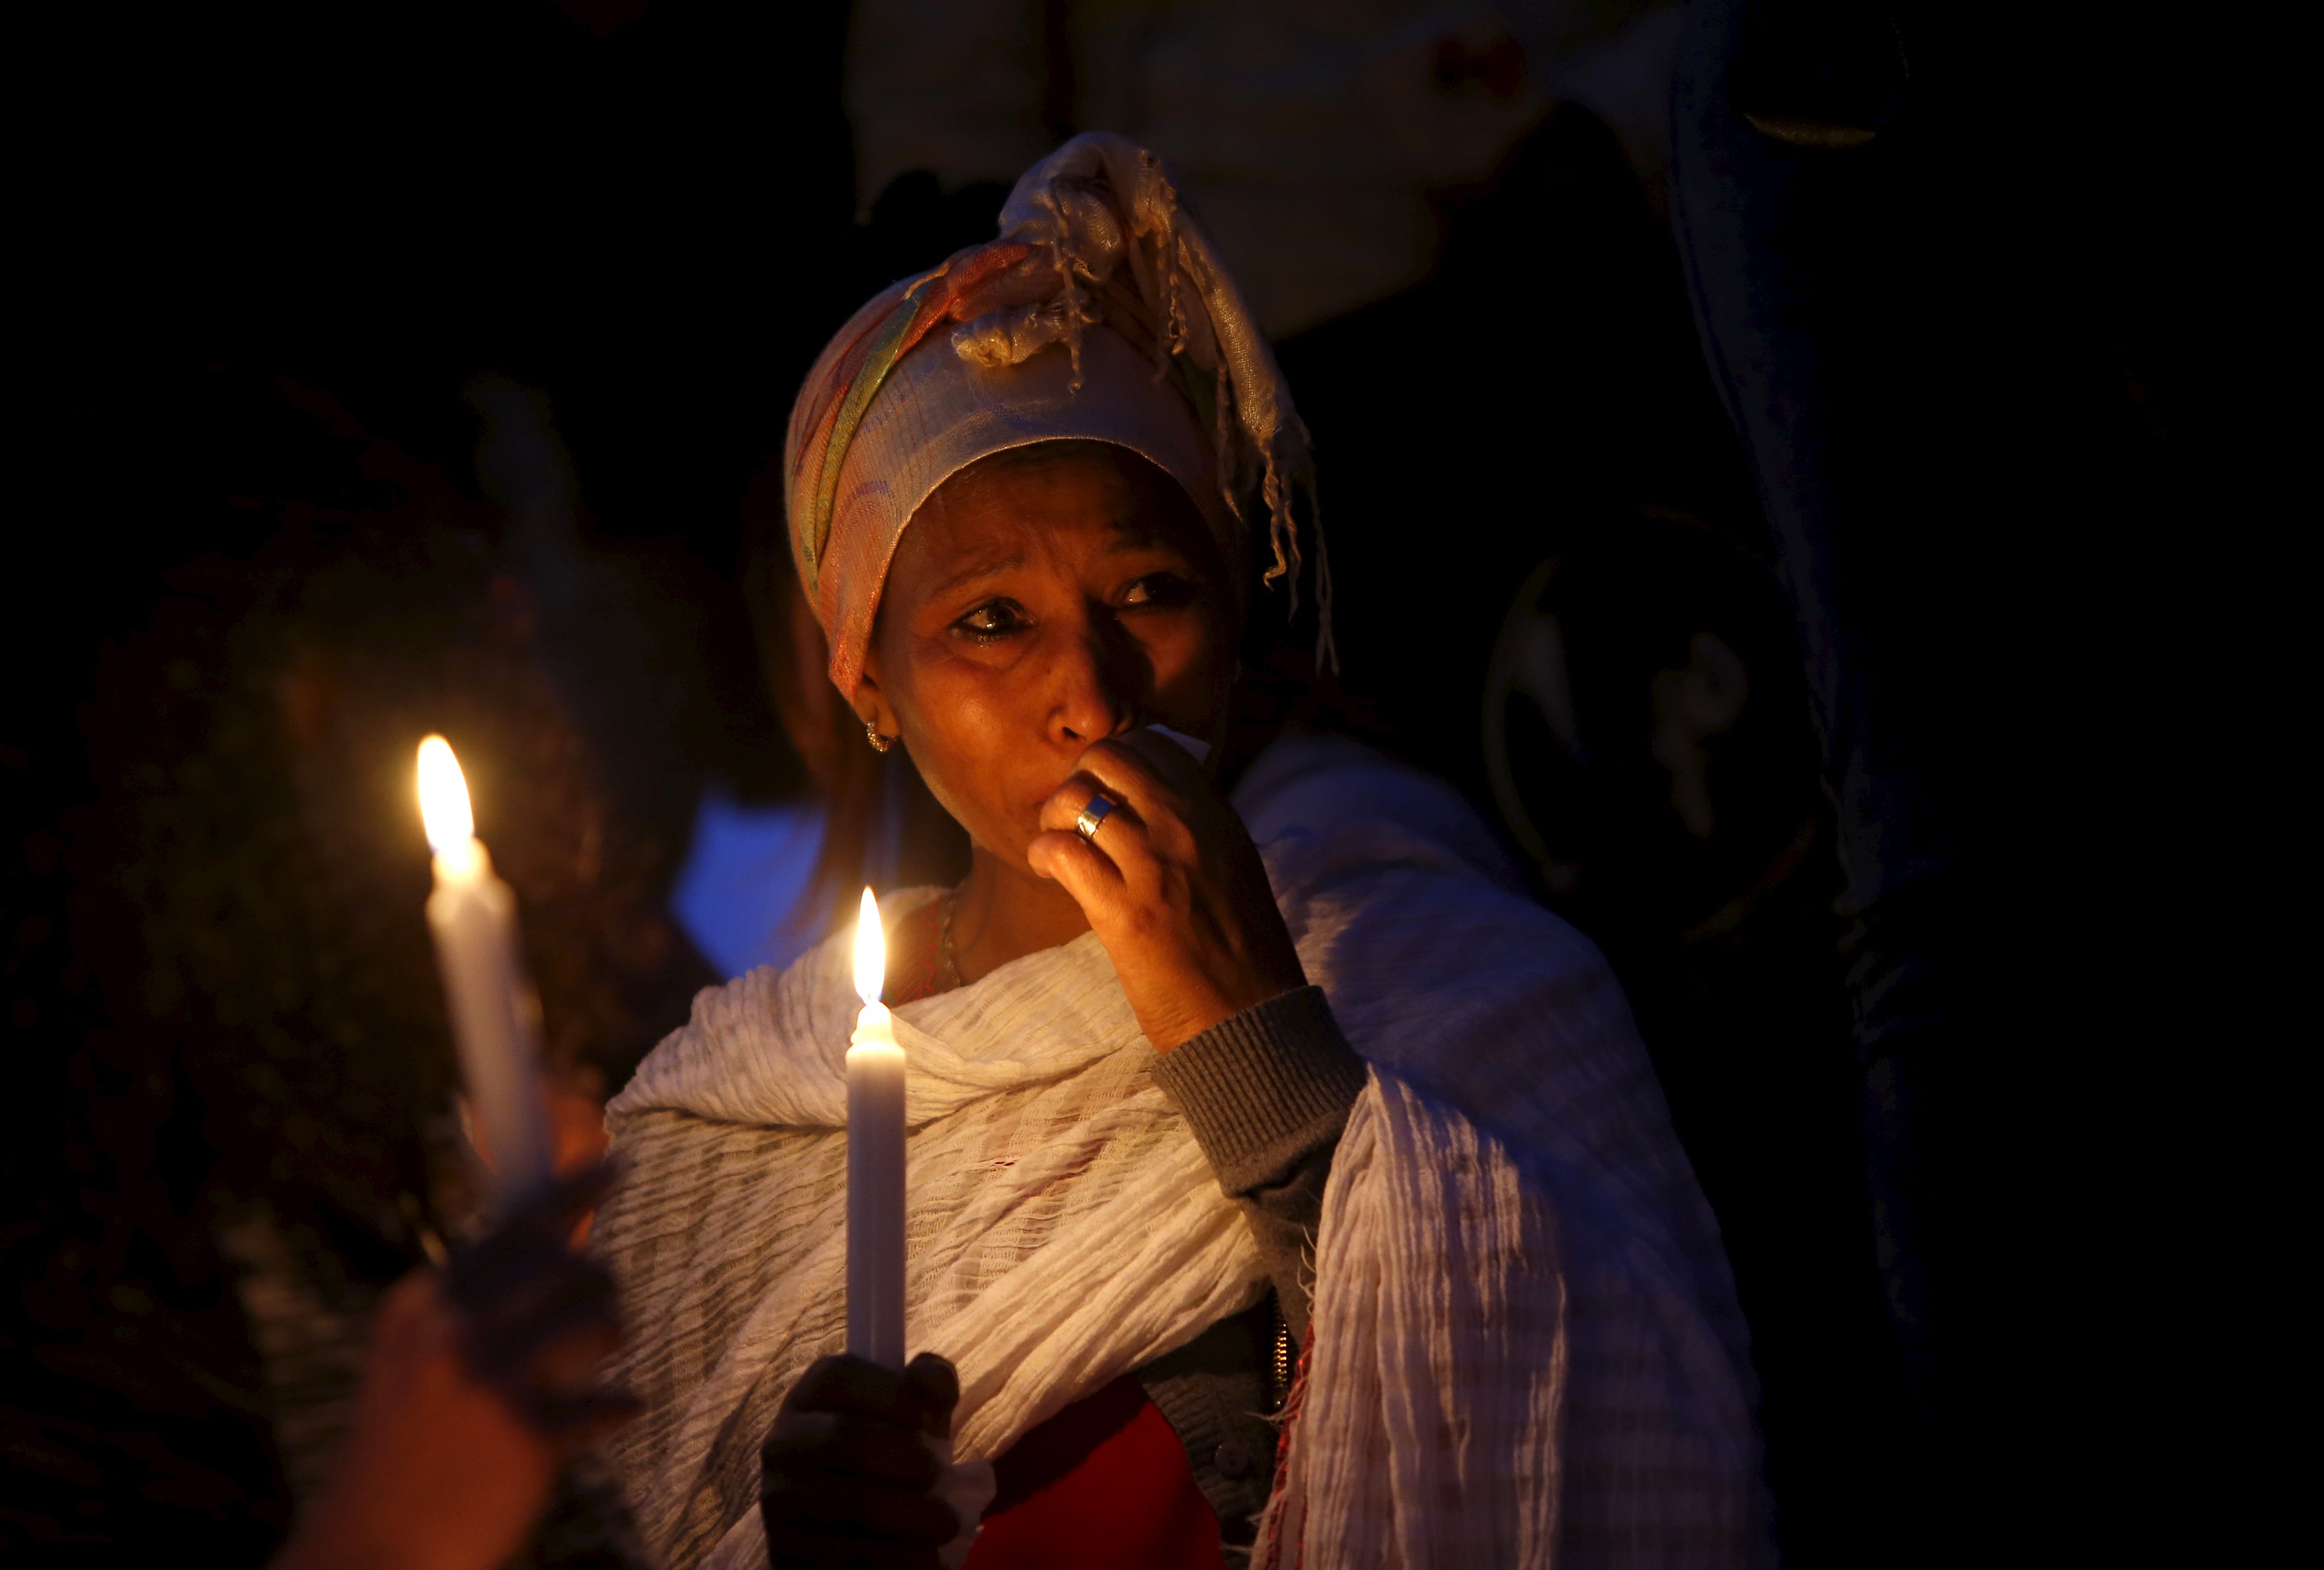 A migrant cries during a candlelight vigil to commemorate migrants who died at sea in Sliema, outside Valletta, April 22, 2015.